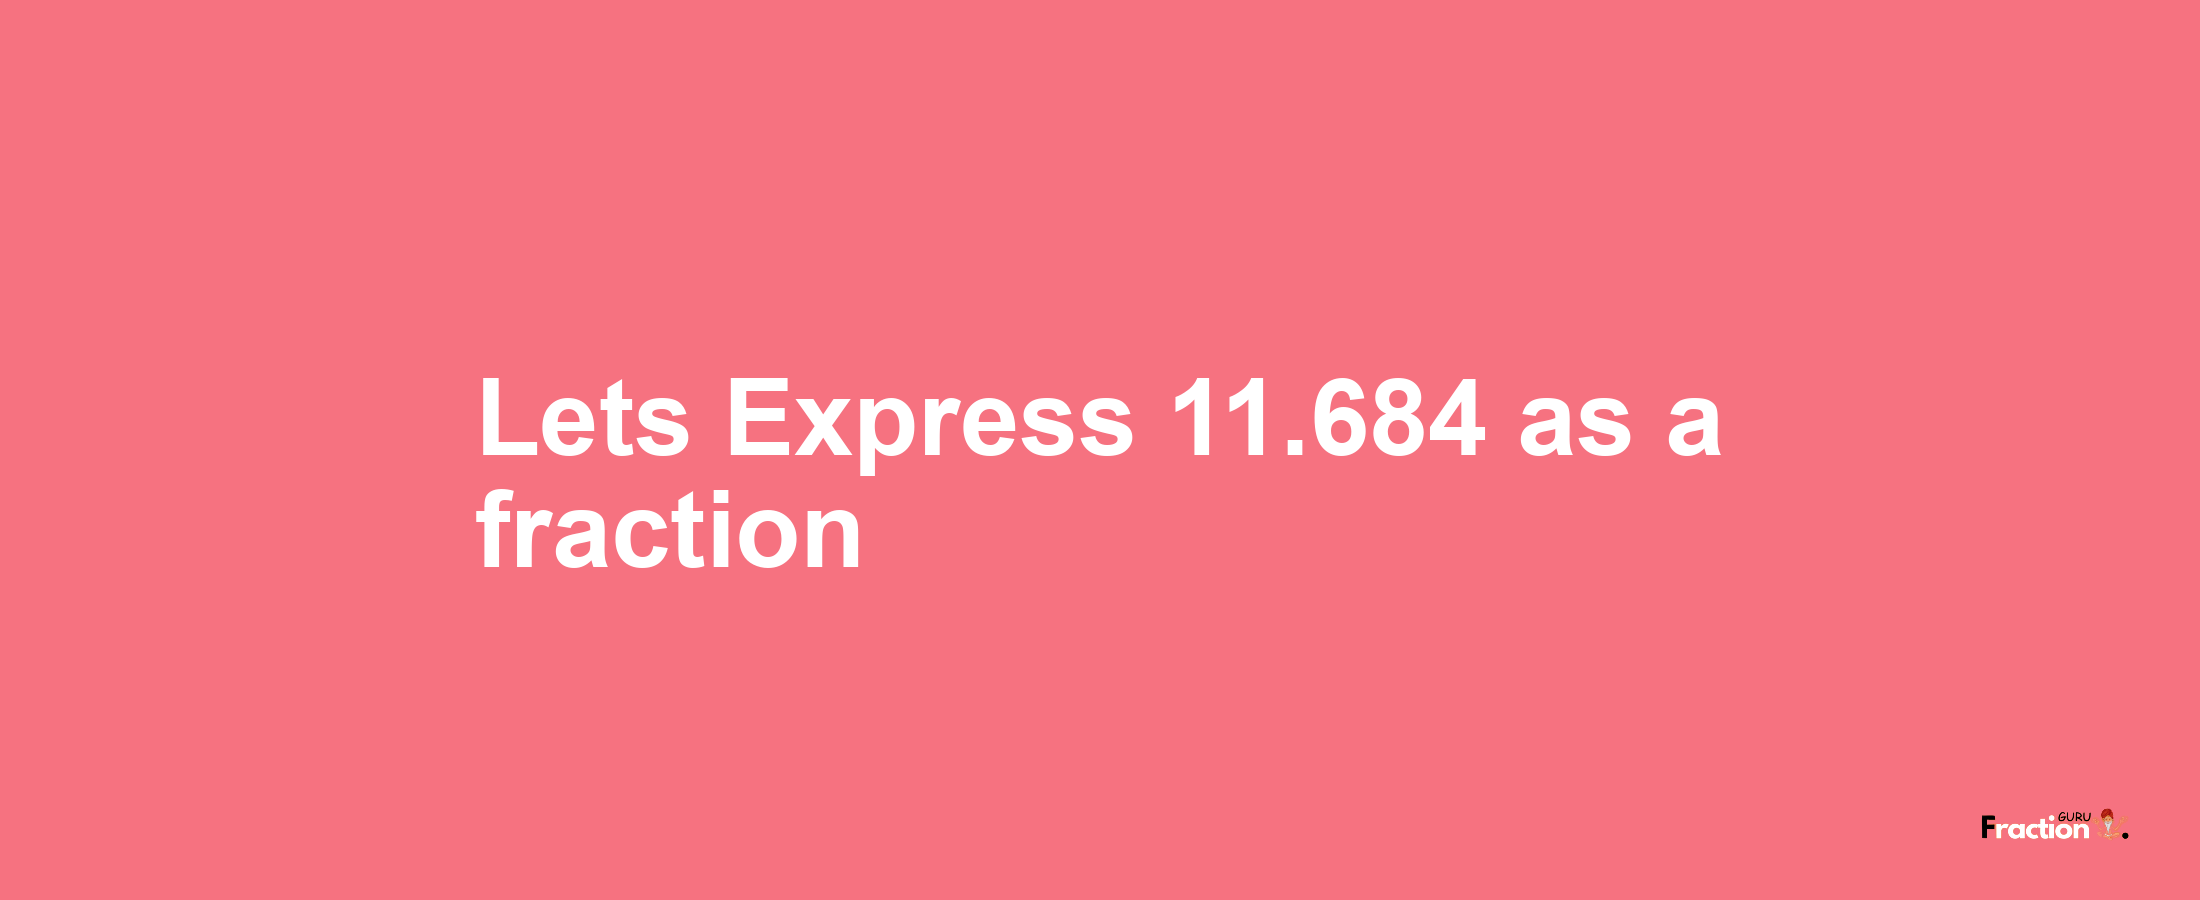 Lets Express 11.684 as afraction